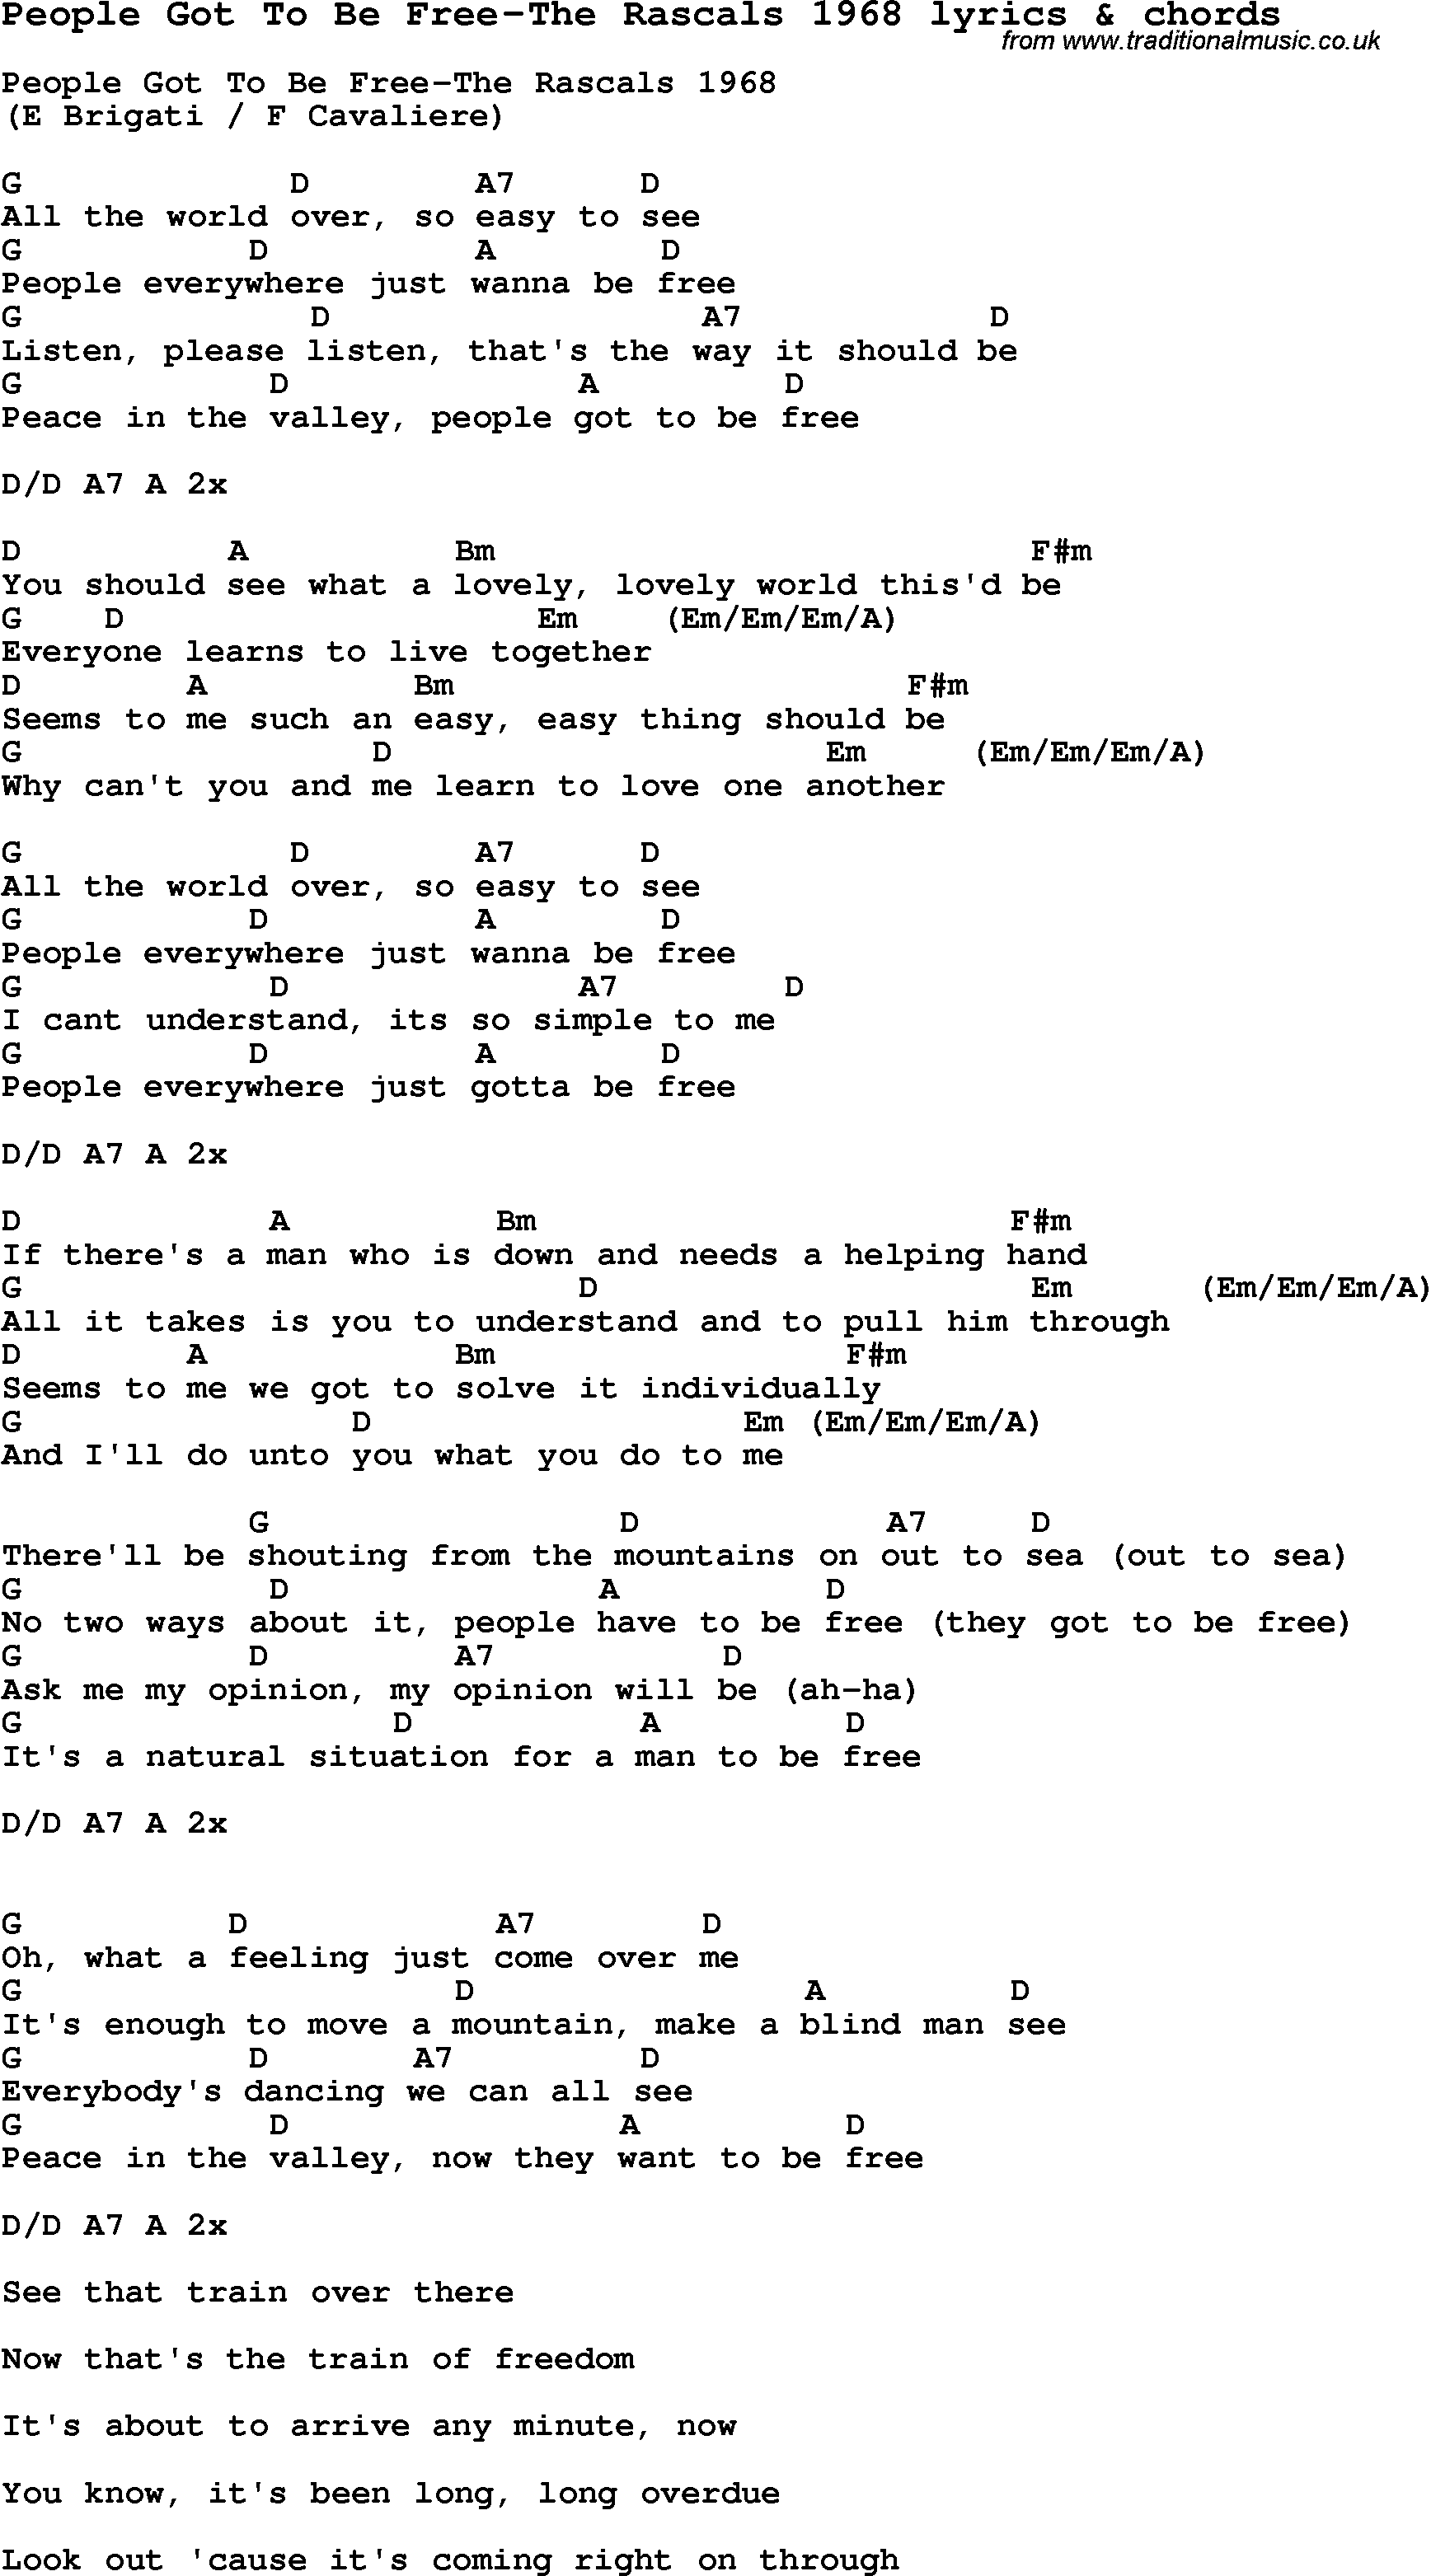 Love Song Lyrics for: People Got To Be Free-The Rascals 1968 with chords for Ukulele, Guitar Banjo etc.